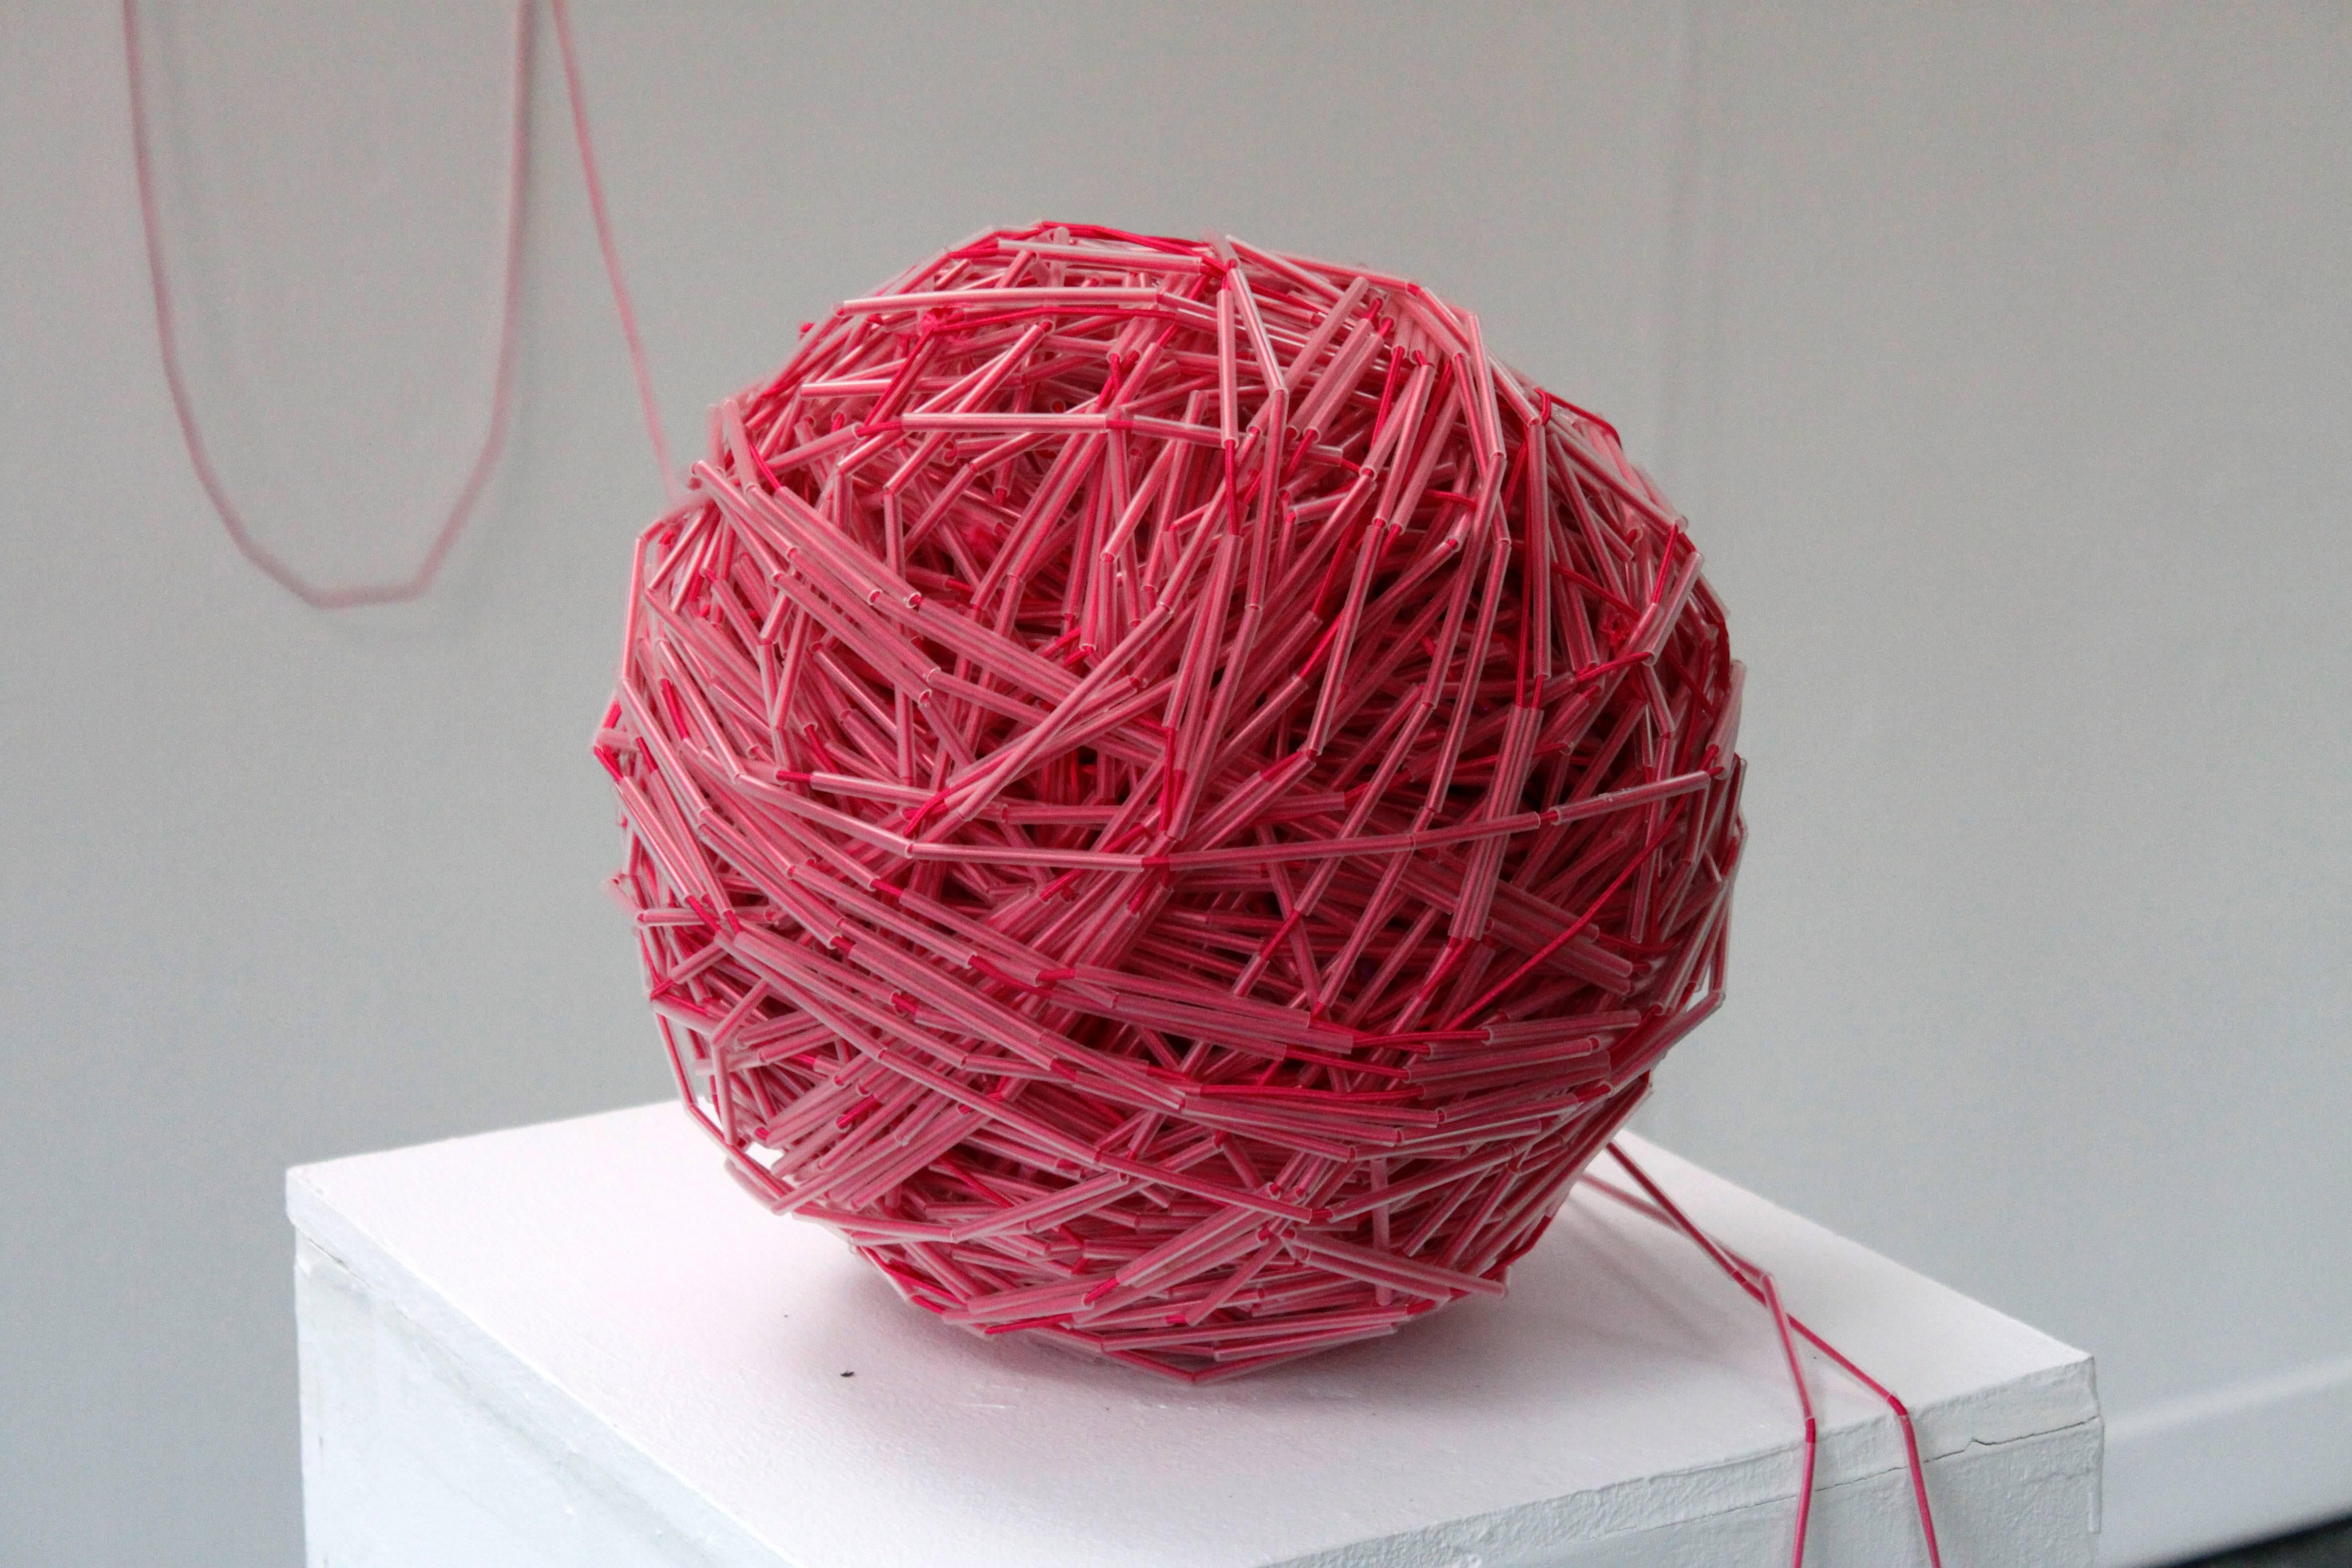 Susan Bleakley Abstract Sculpture - Dreaming Of Knitting